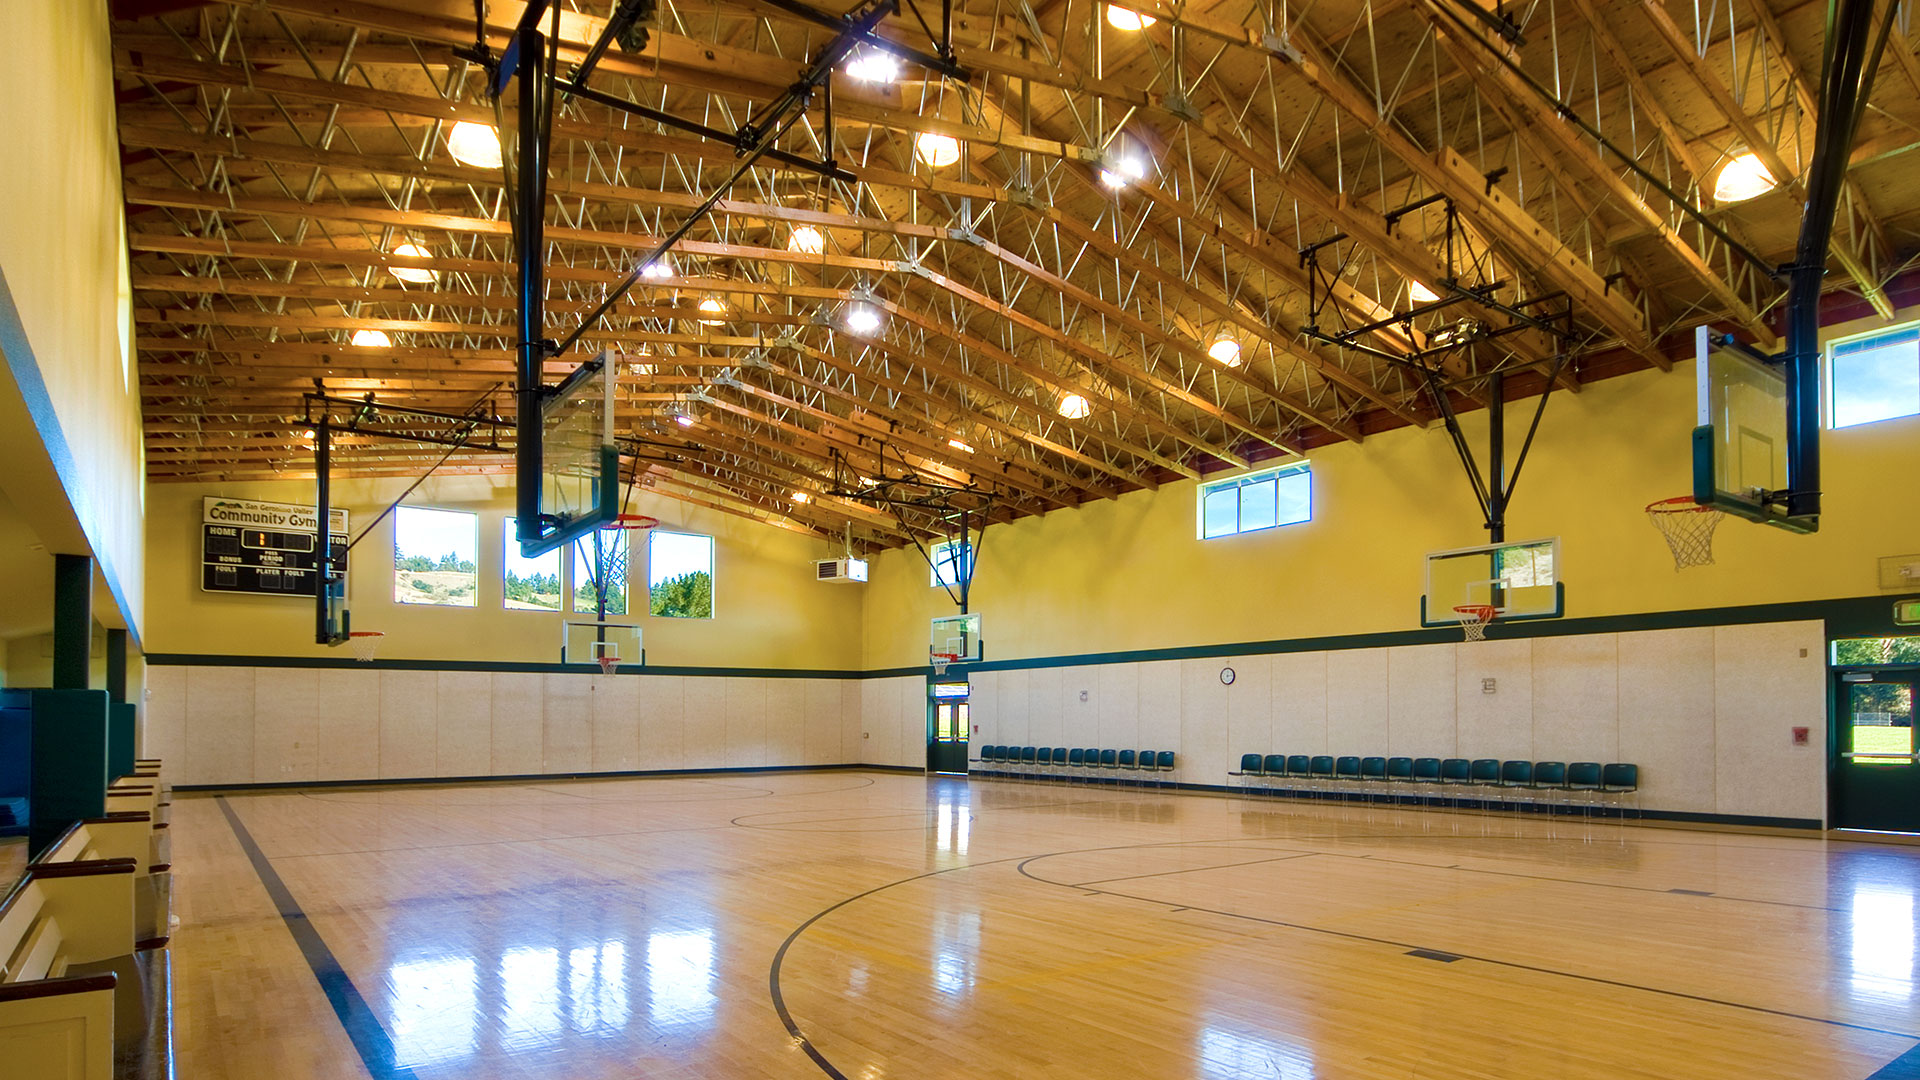 Gymnasium interior and basketball court, with intricate exposed wood trusses above yellow walls and white wainscot.